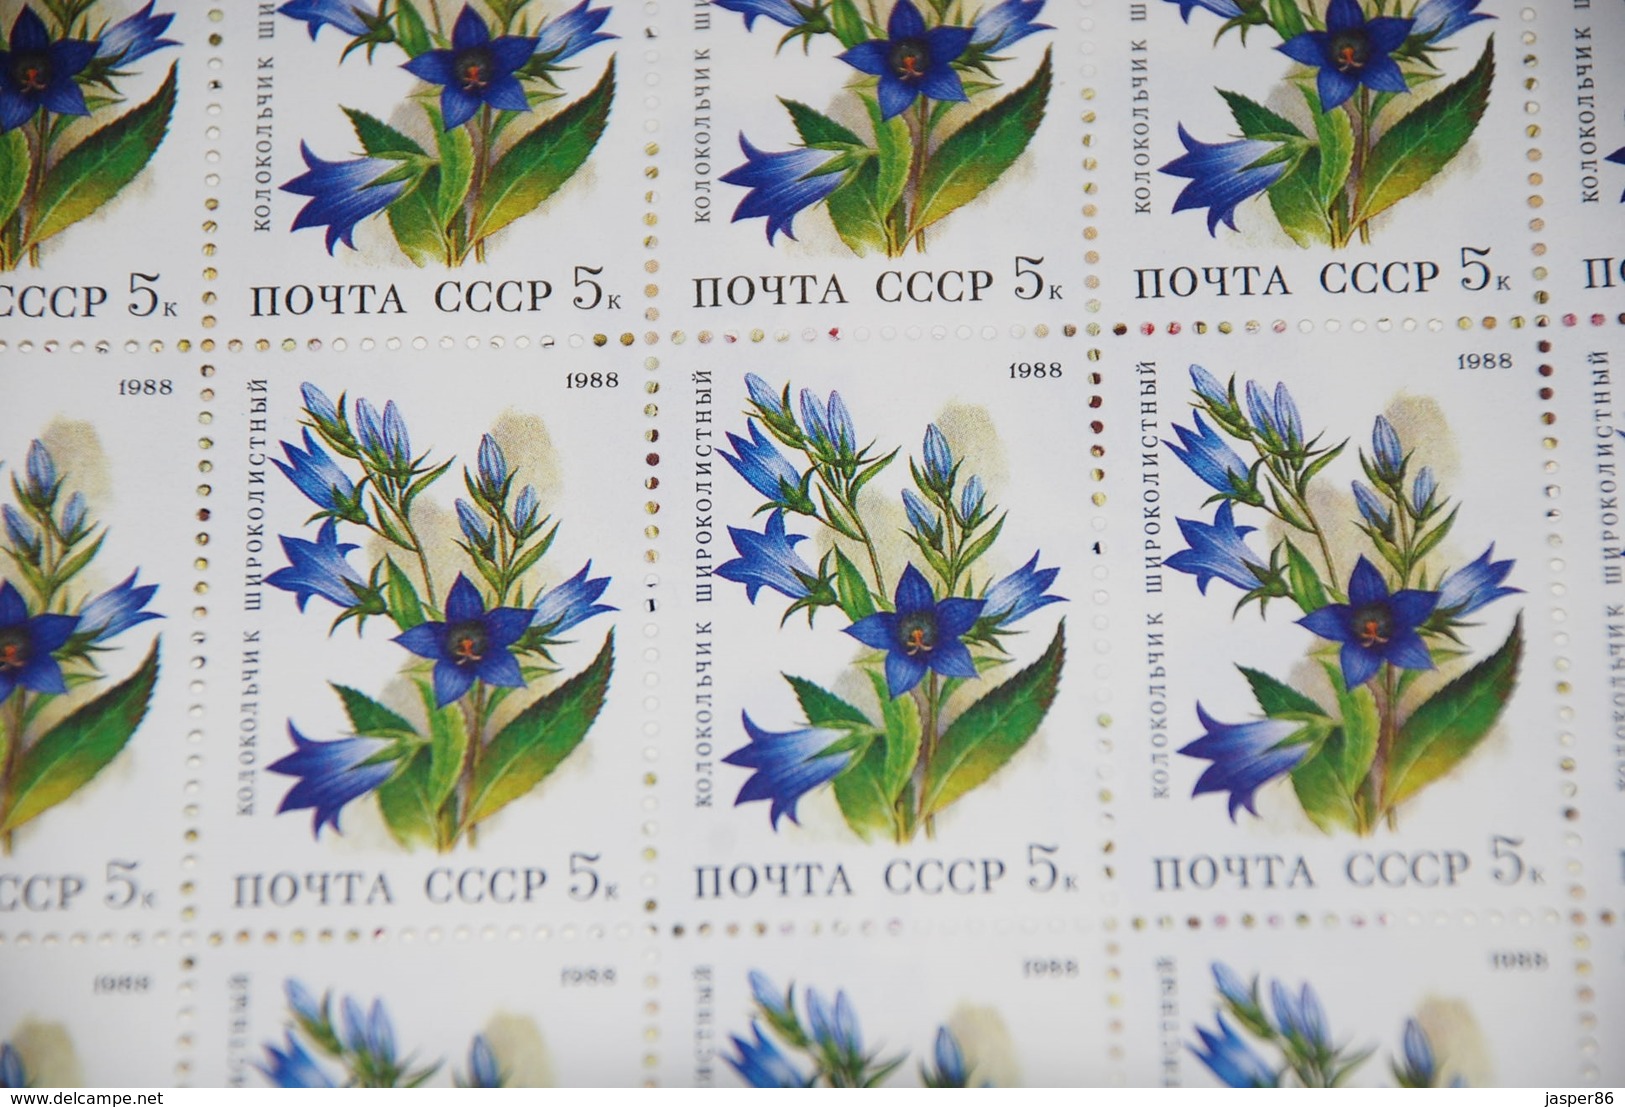 Russia MNH Sc 5687-5691 Mi 5847-5851 Bell Flower, Lily Complete sheets CV$100.80